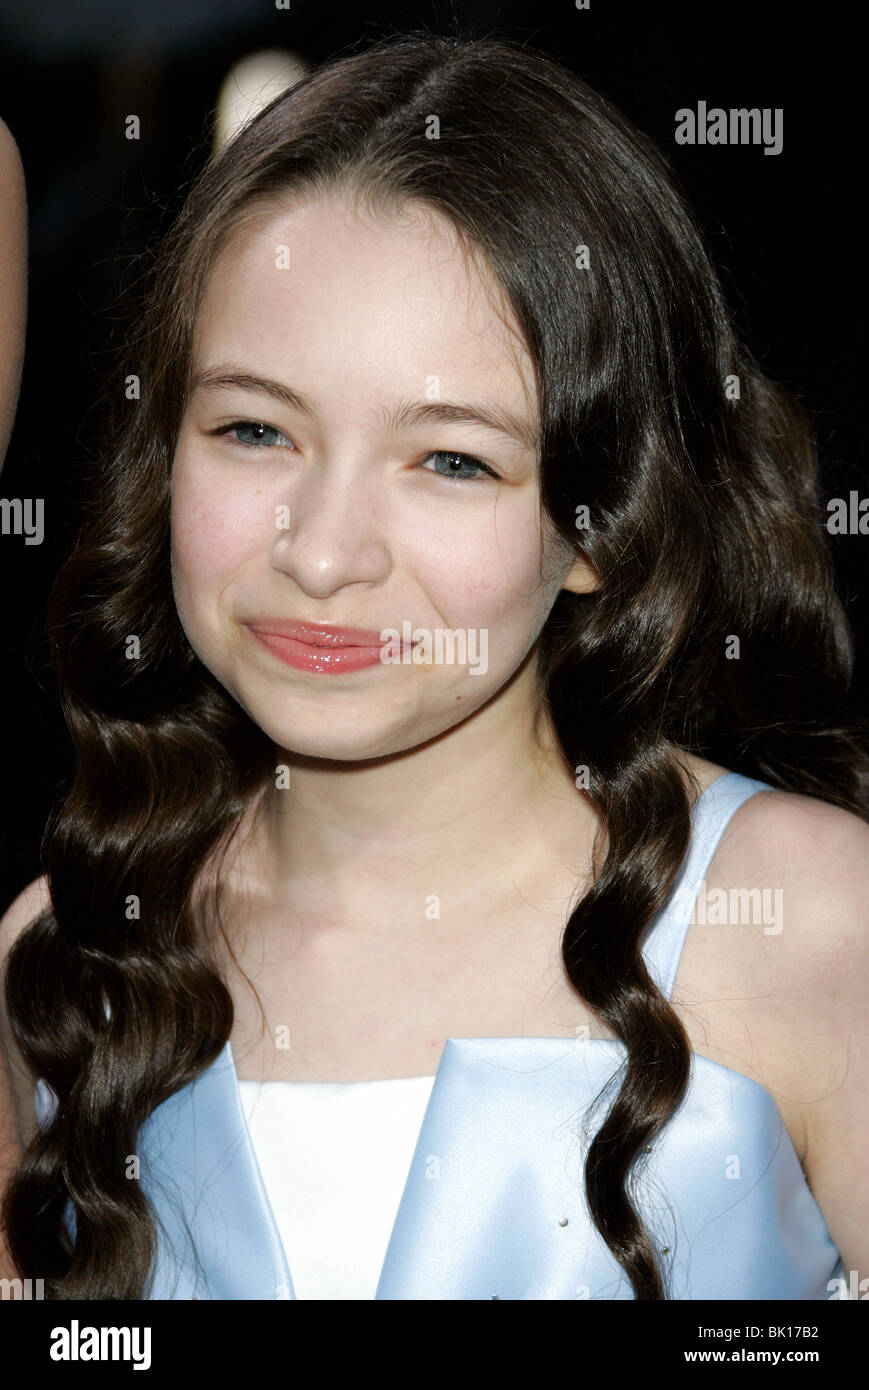 JODELLE FERLAND SILENT HILL WORLD PREMIERE HOLLYWOOD LOS ANGELES USA 20 April 2006 Stock Photo